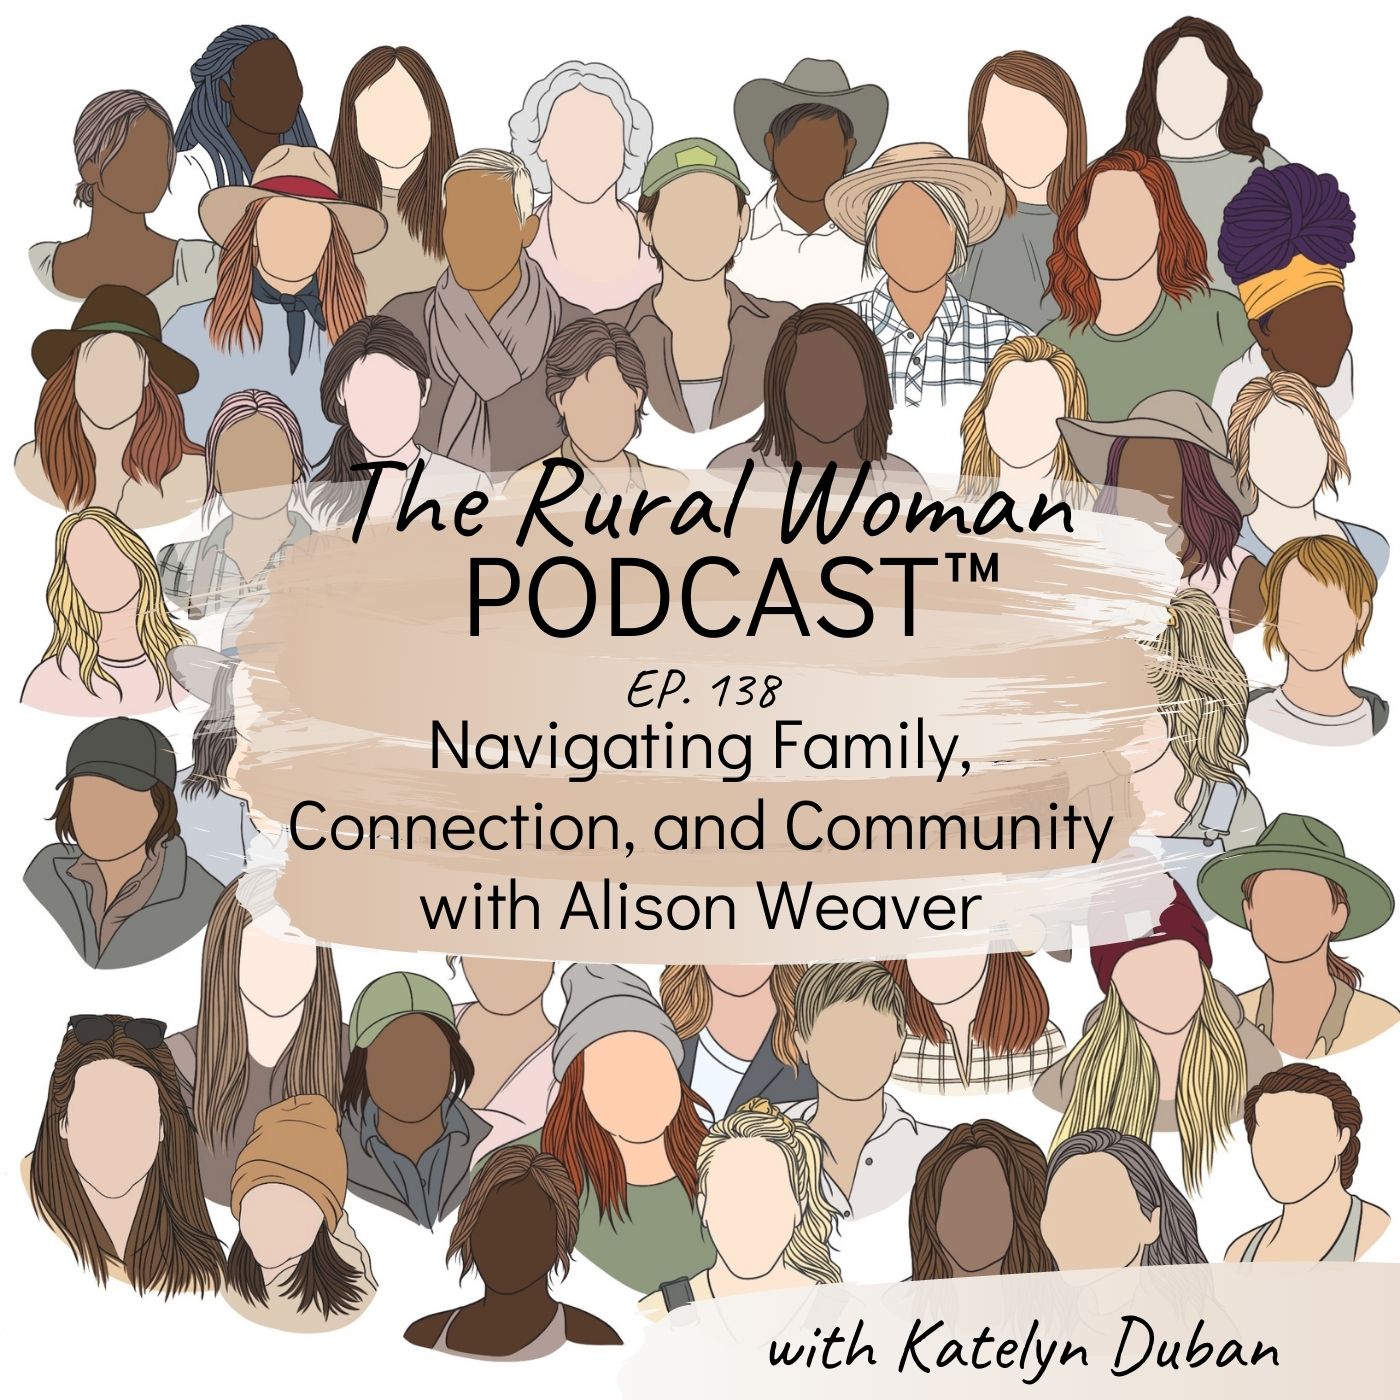 Navigating Family, Connection, and Community with Alison Weaver